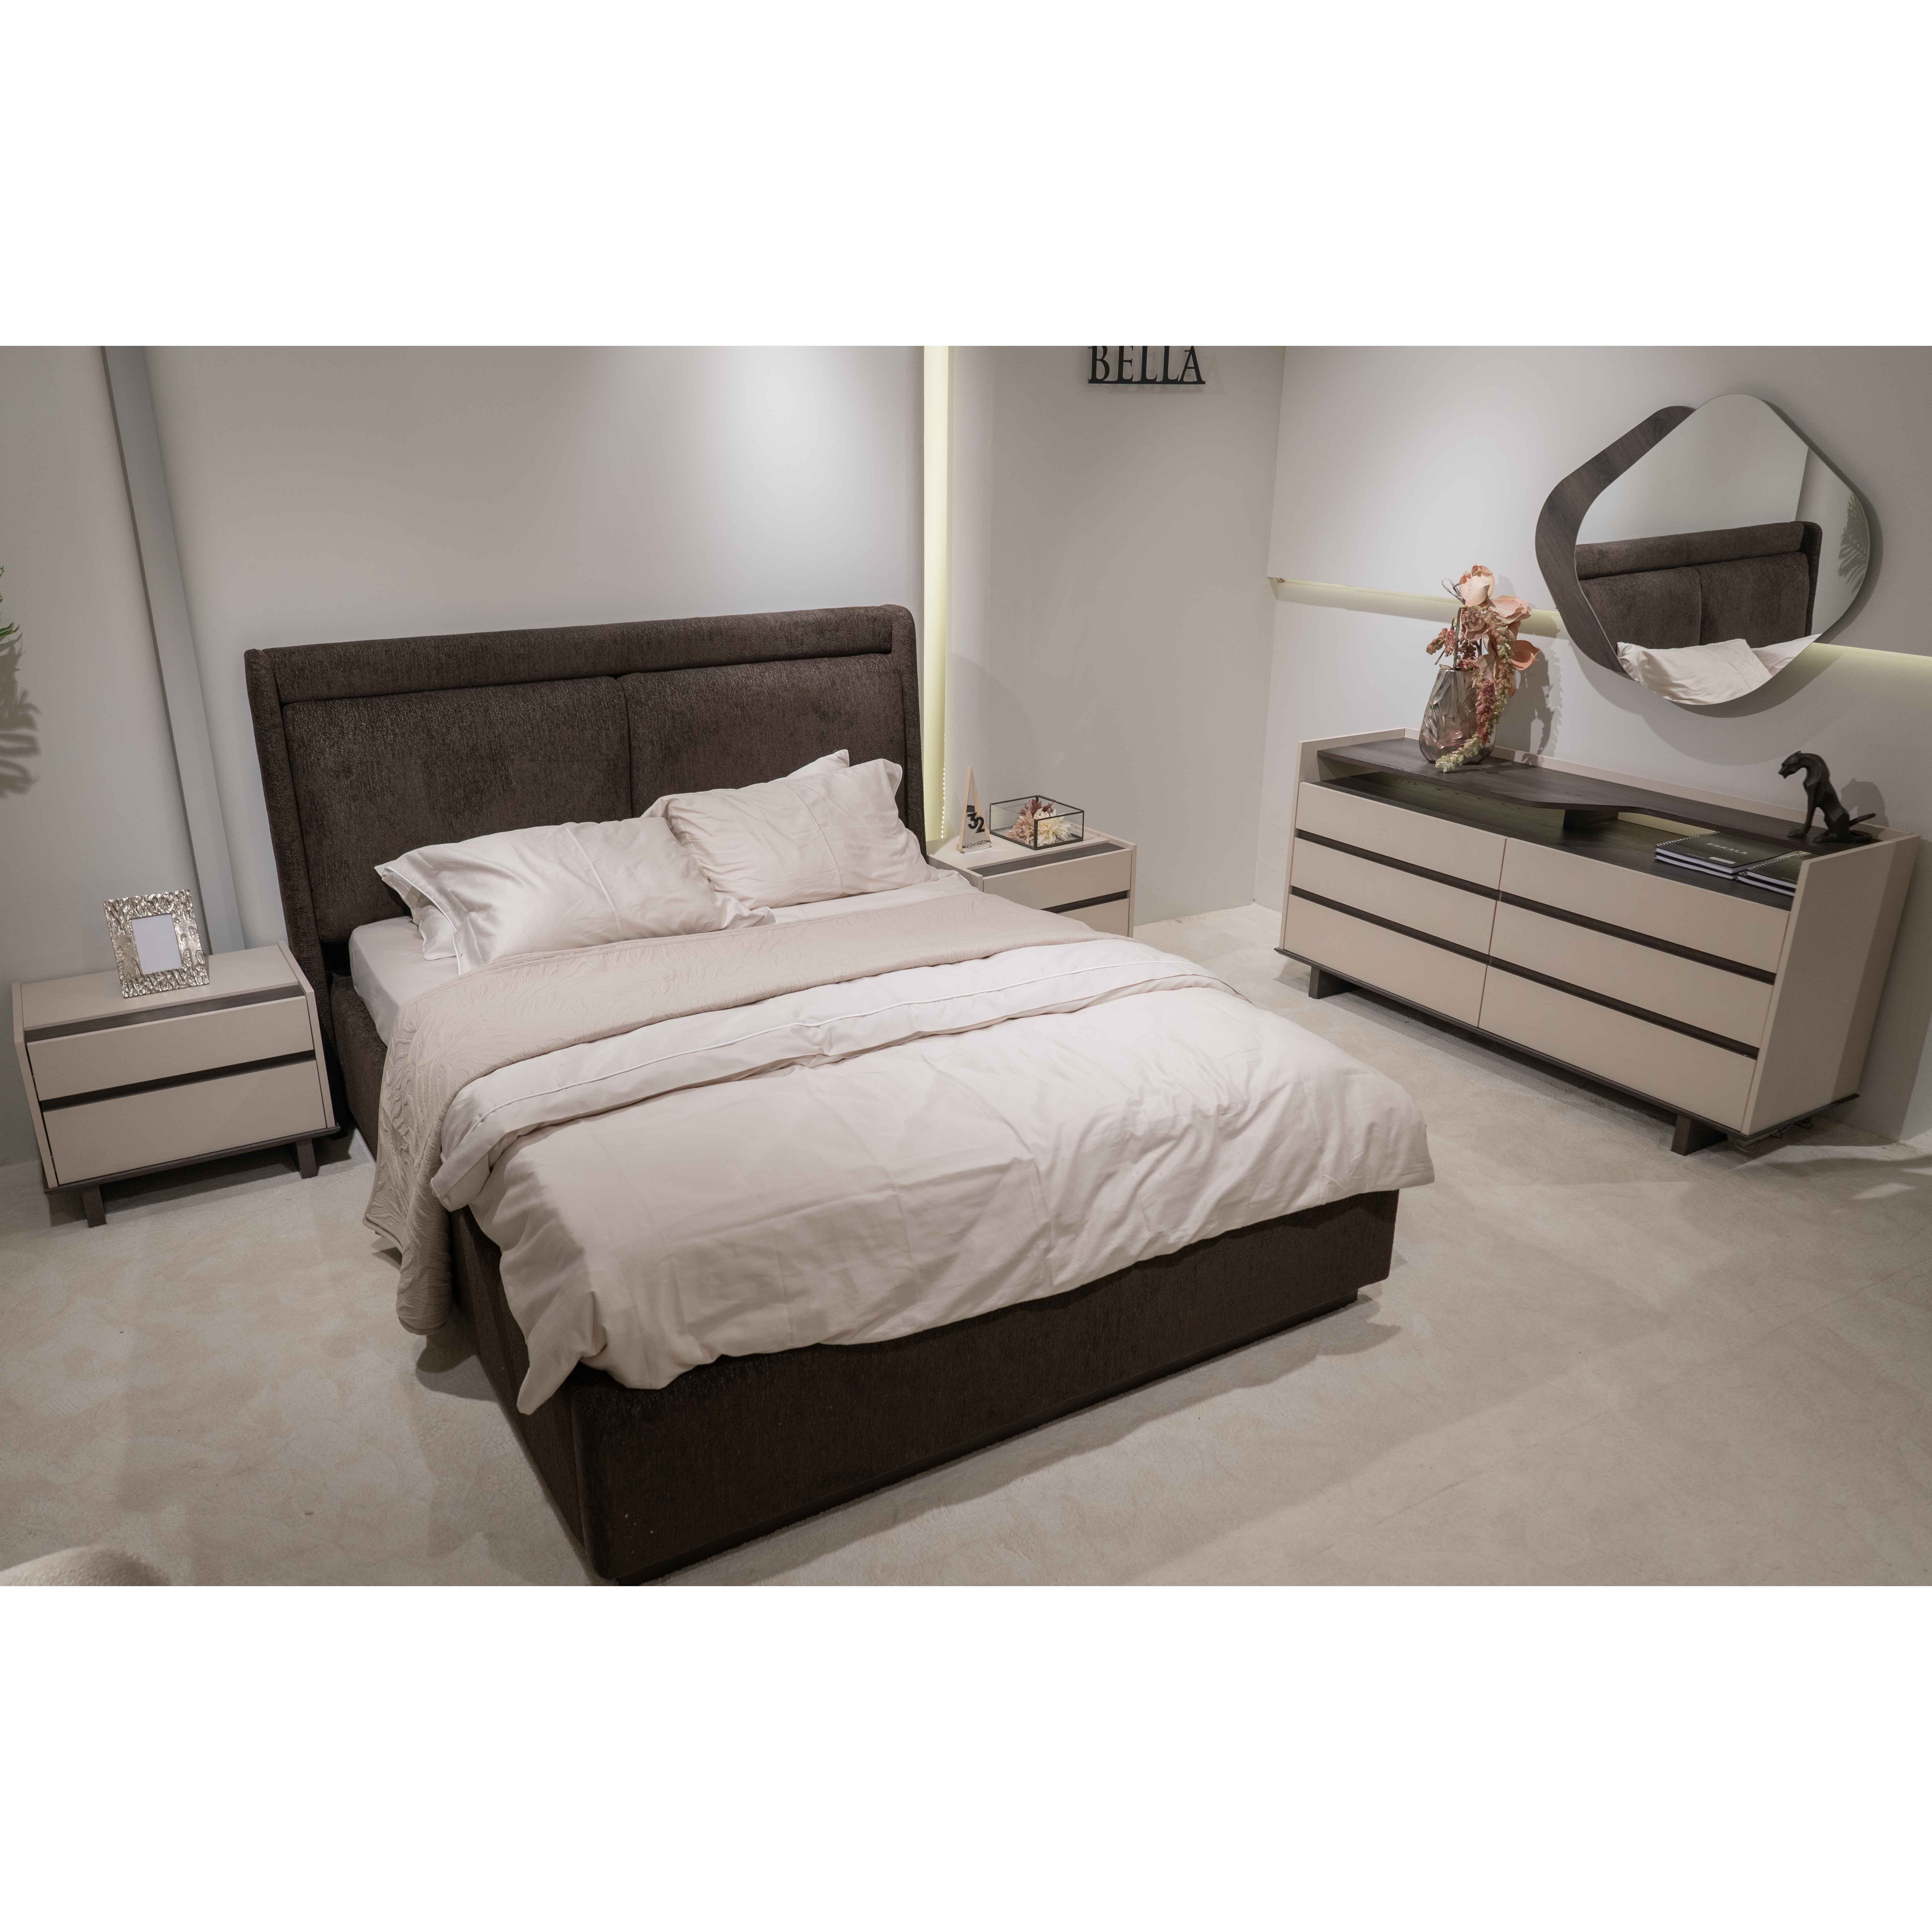 Bella Bed Without Storage 160x200 cm